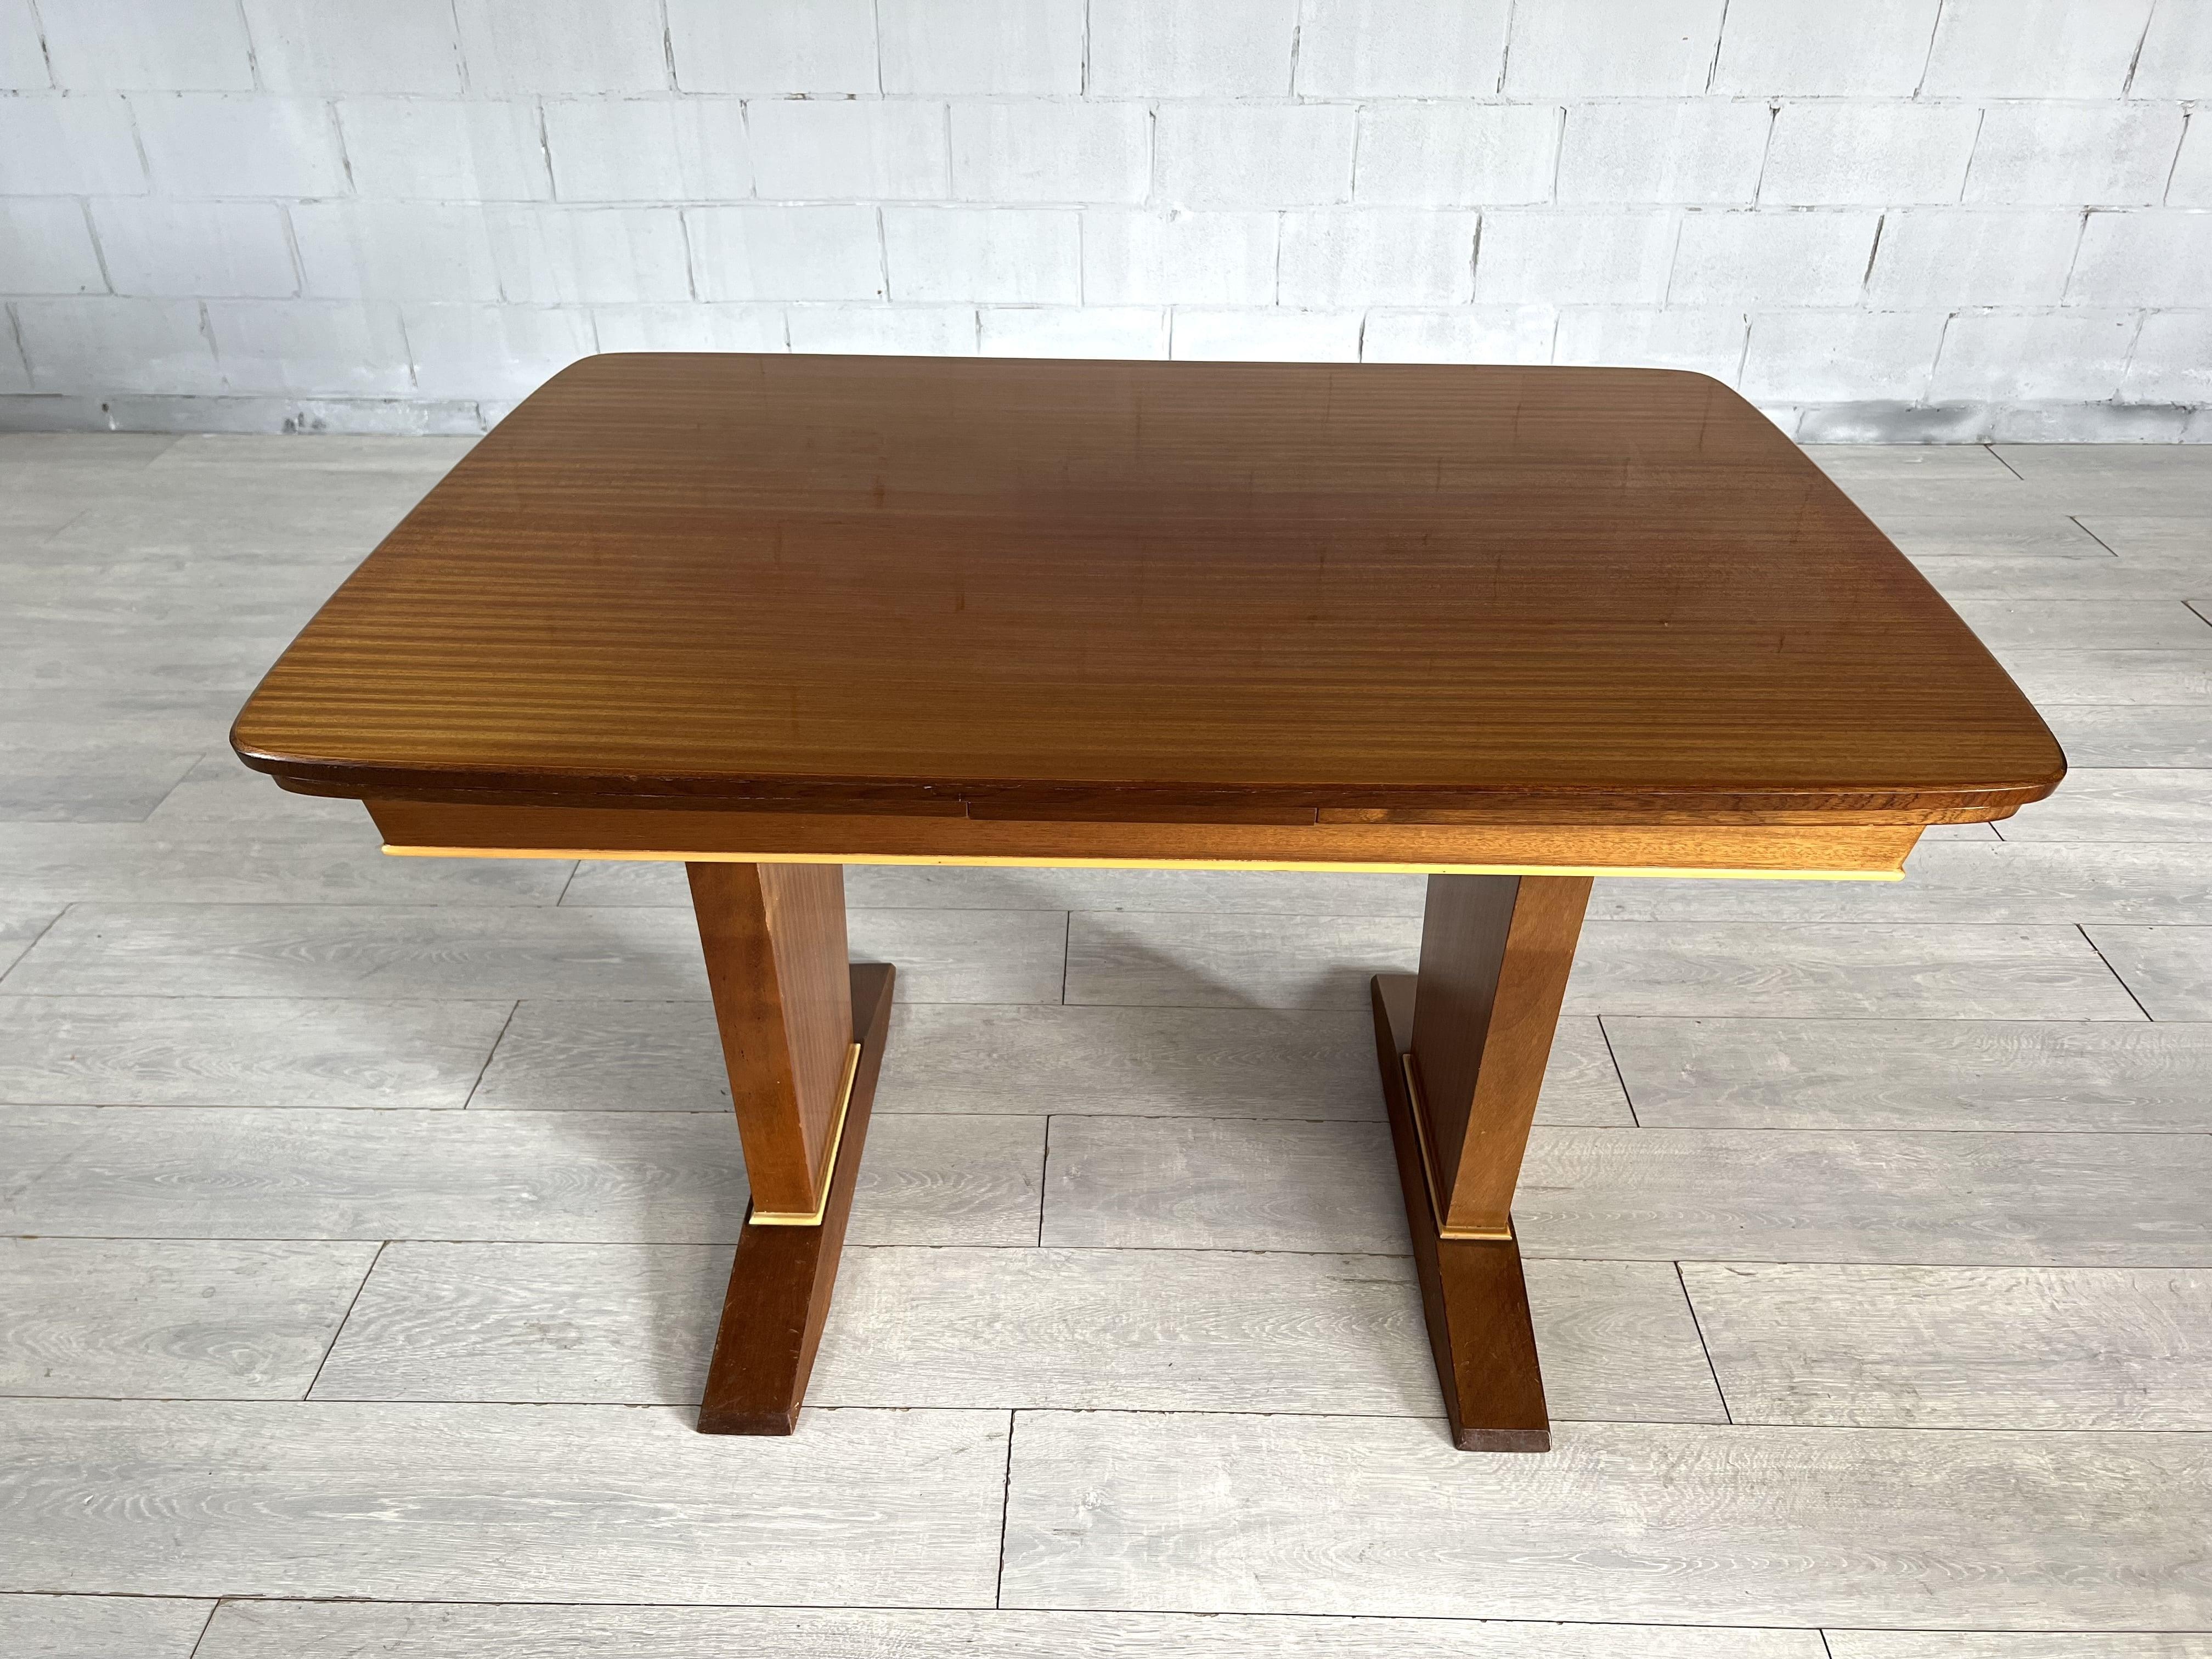 20th Century Vintage Art Deco Style Extendable Fruit Wood Dining Table